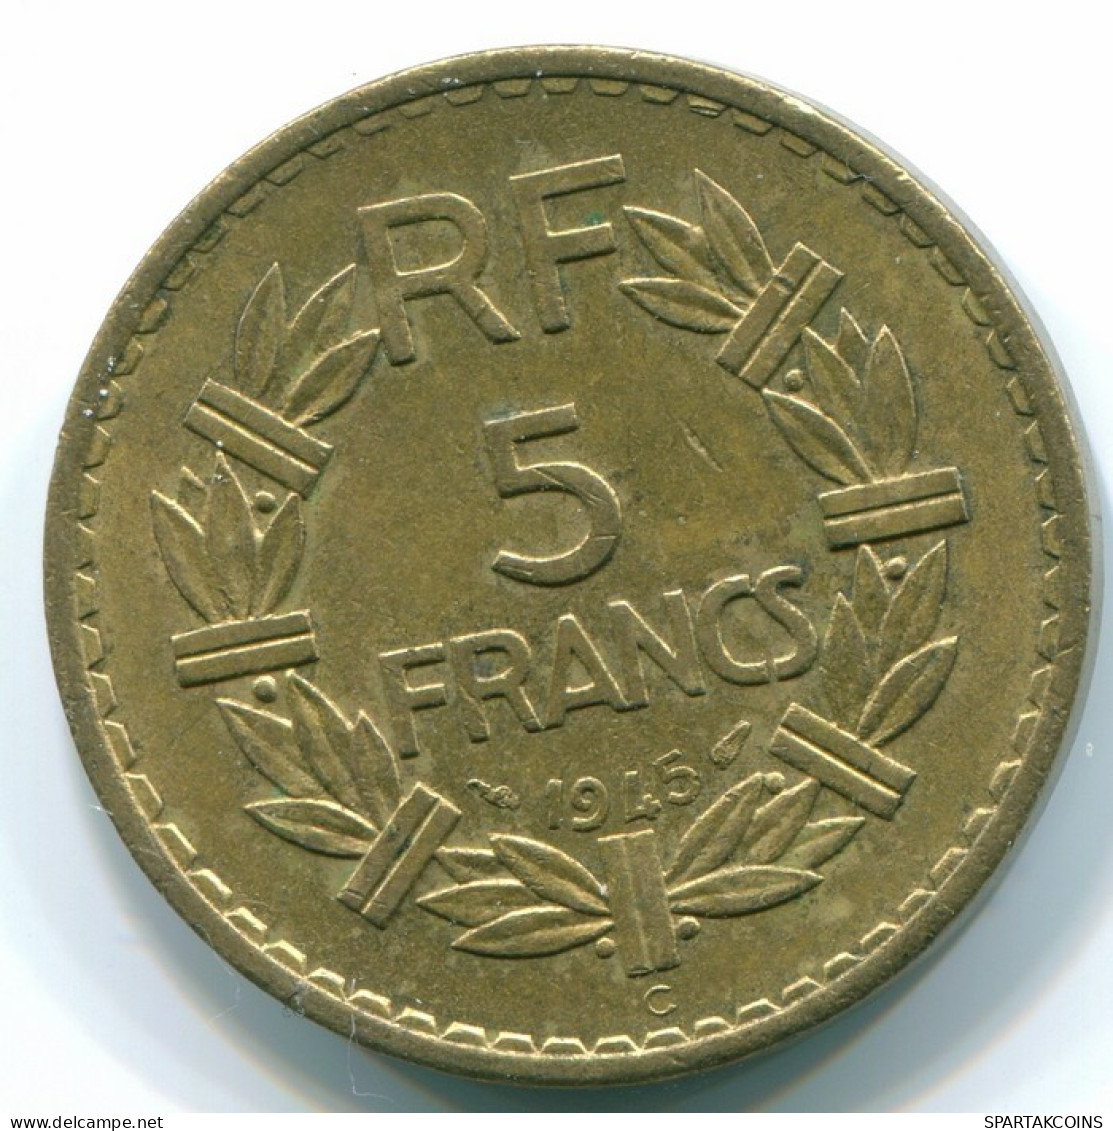 5 FRANCS 1945 FRANCIA FRANCE COLONIAL FOR USE IN AFRICA XF #FR1020.32.E.A - 5 Francs